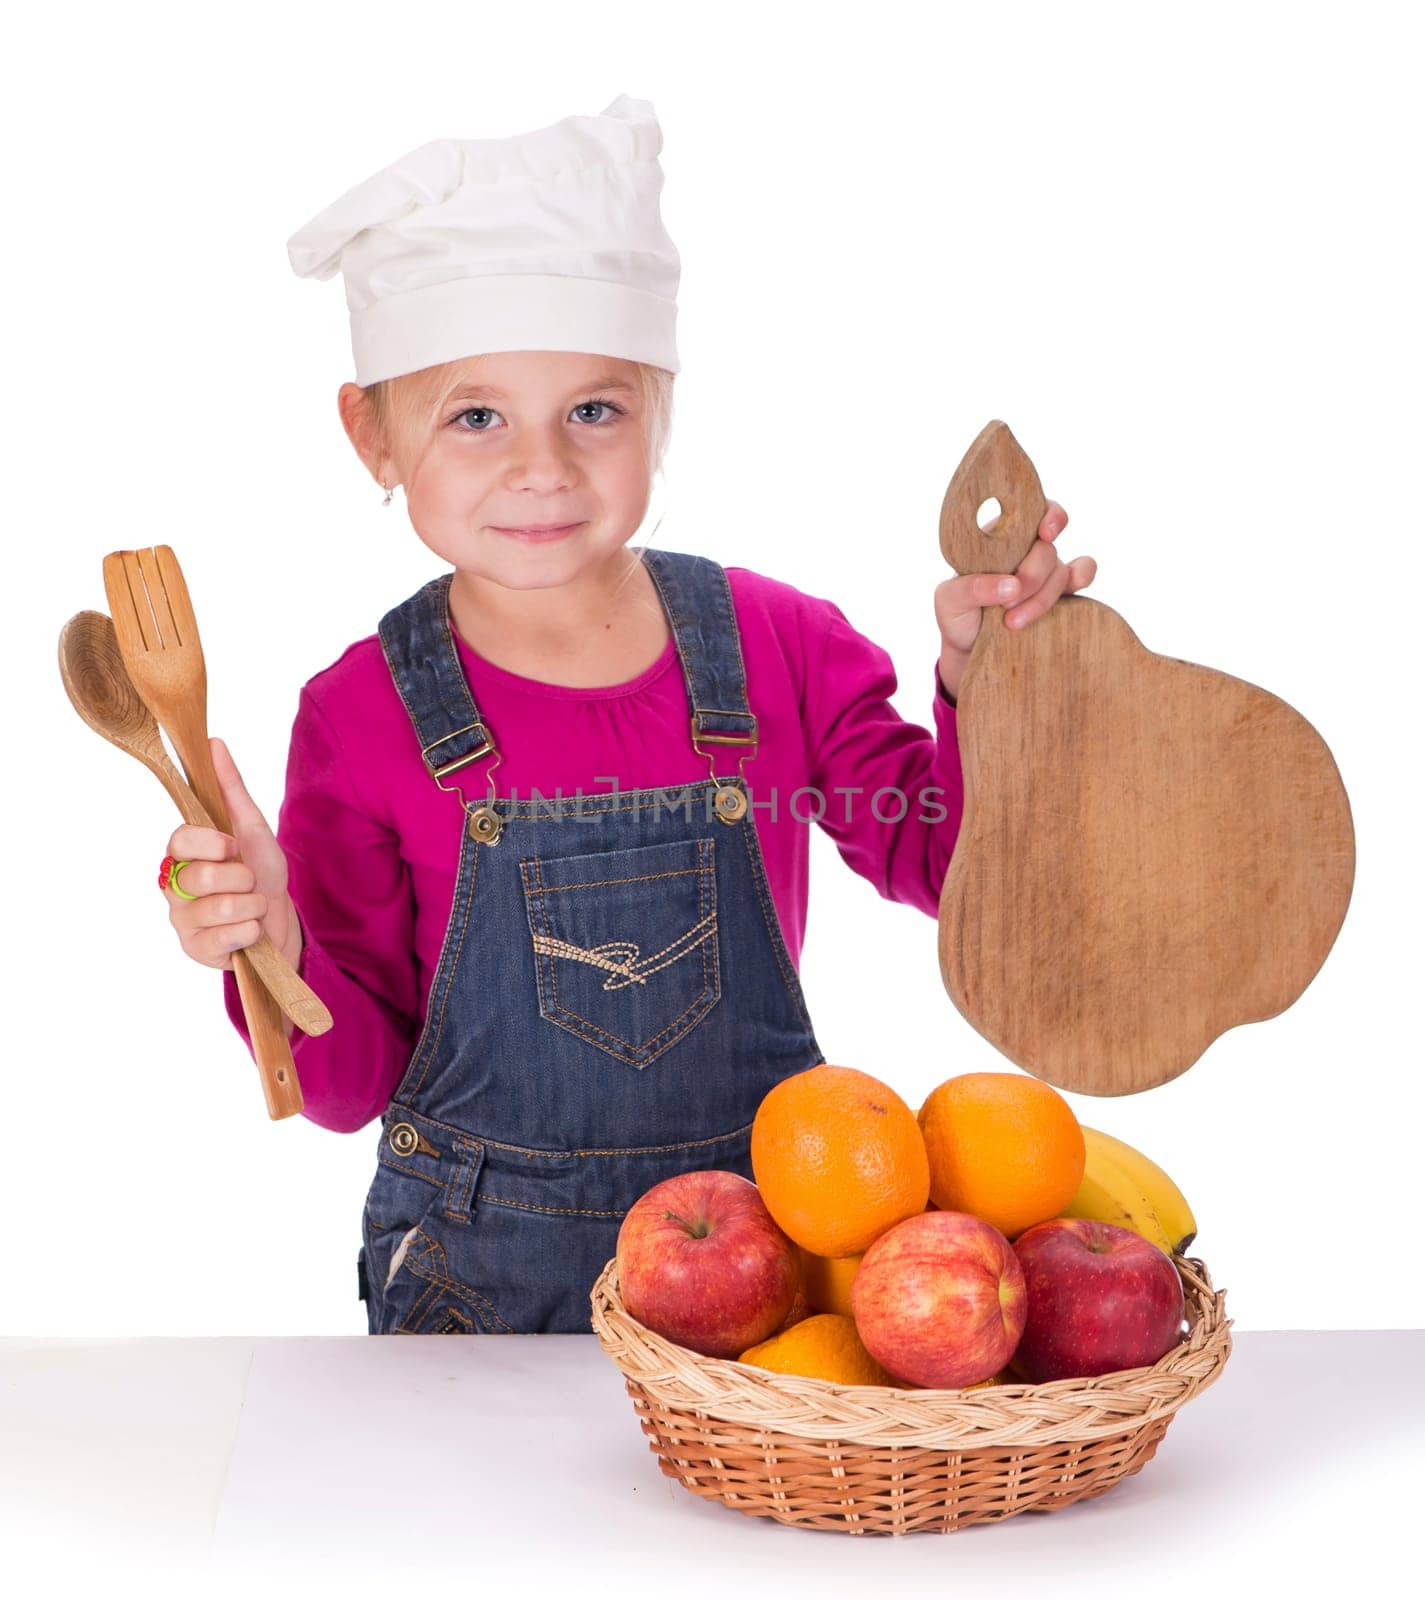 Close-up portrait of a little girl holding fruits - apples, bananas and oranges and kitchen appliances. Isolated on a light background. by aprilphoto